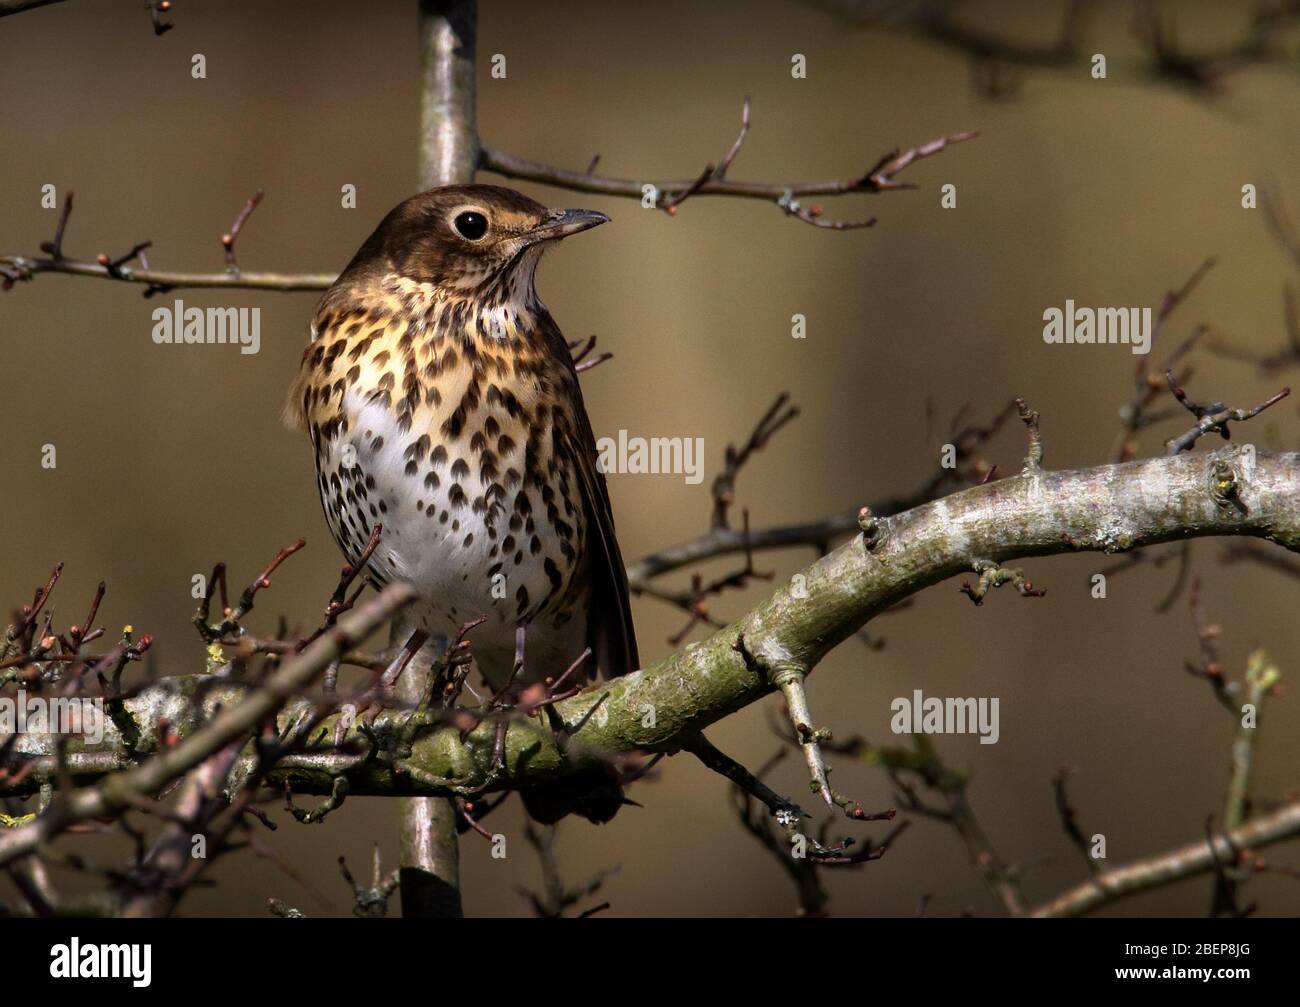 Front Shot Of A Song Thrush, Turdus philomelos, Perched In A Tree Looking Left On A Diffuse Brown Backgrouond. Taken at Stour Valley UK Stock Photo